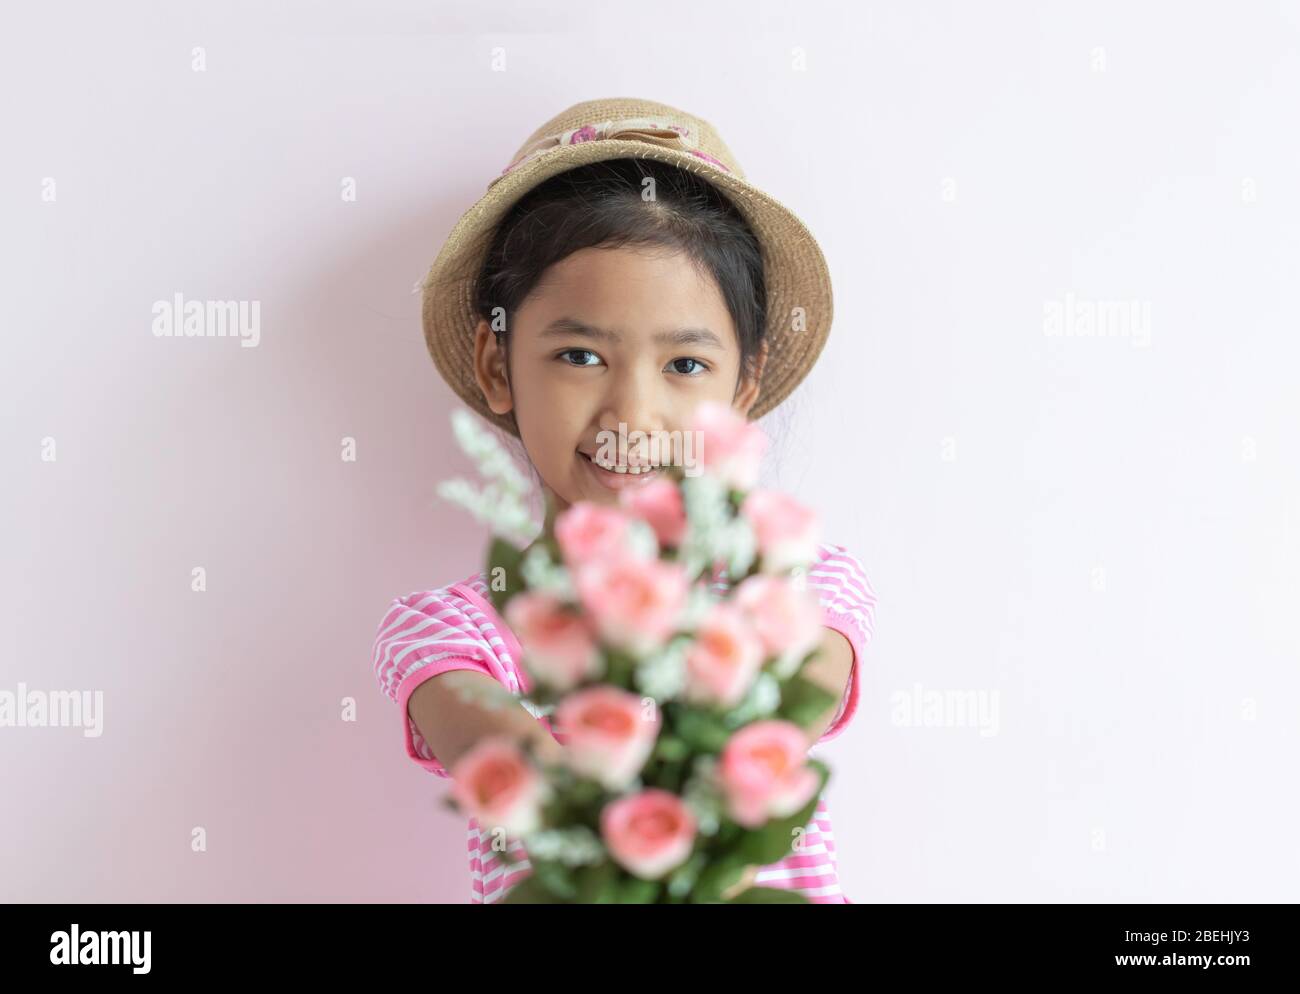 Portrait of an Asian little girl wearing a pink and white striped dress. The child wears a hat and holding rose flowers with smiling and happy. Select Stock Photo